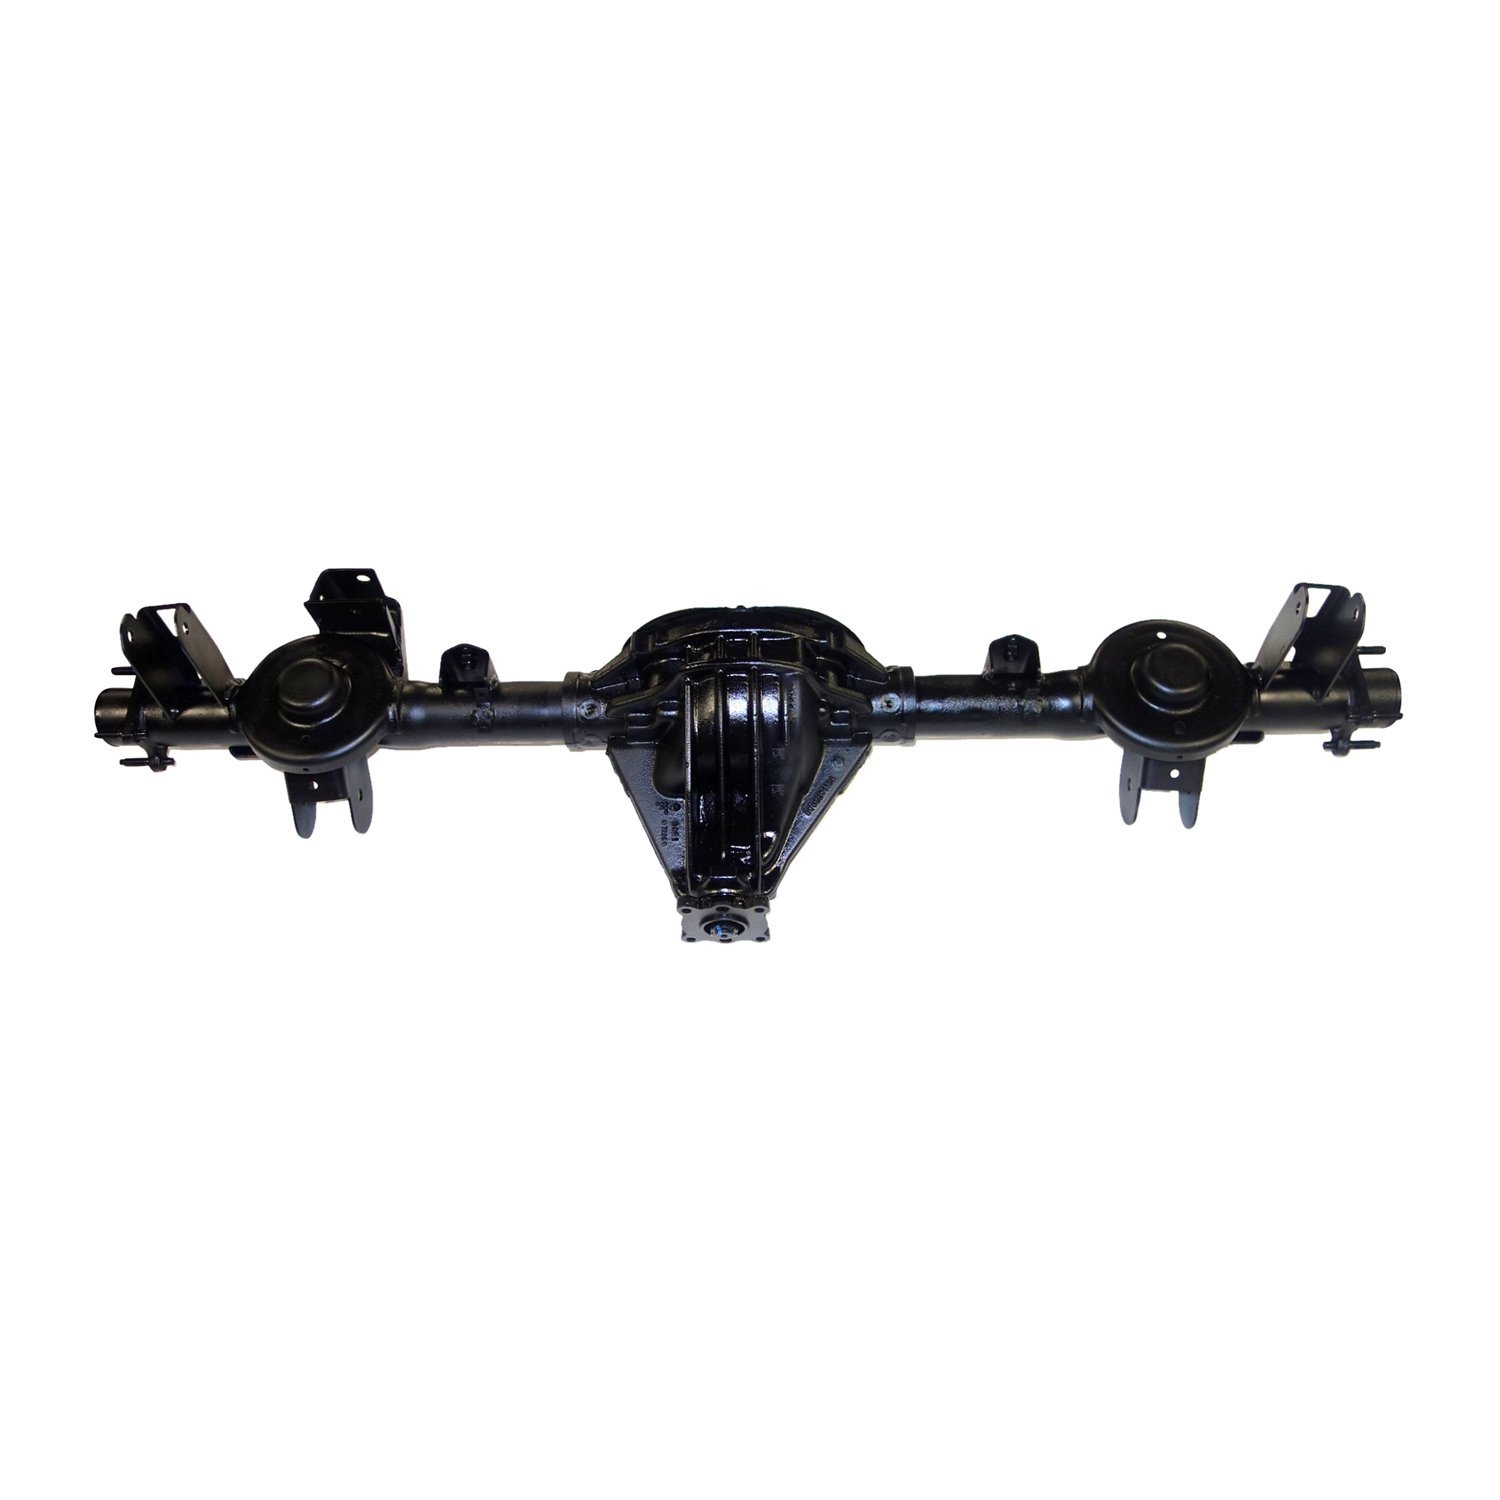 Remanufactured Complete Axle Assy for Chy 8.25" 2005 Liberty 3.73 , 2.8l & 3.7l with ABS